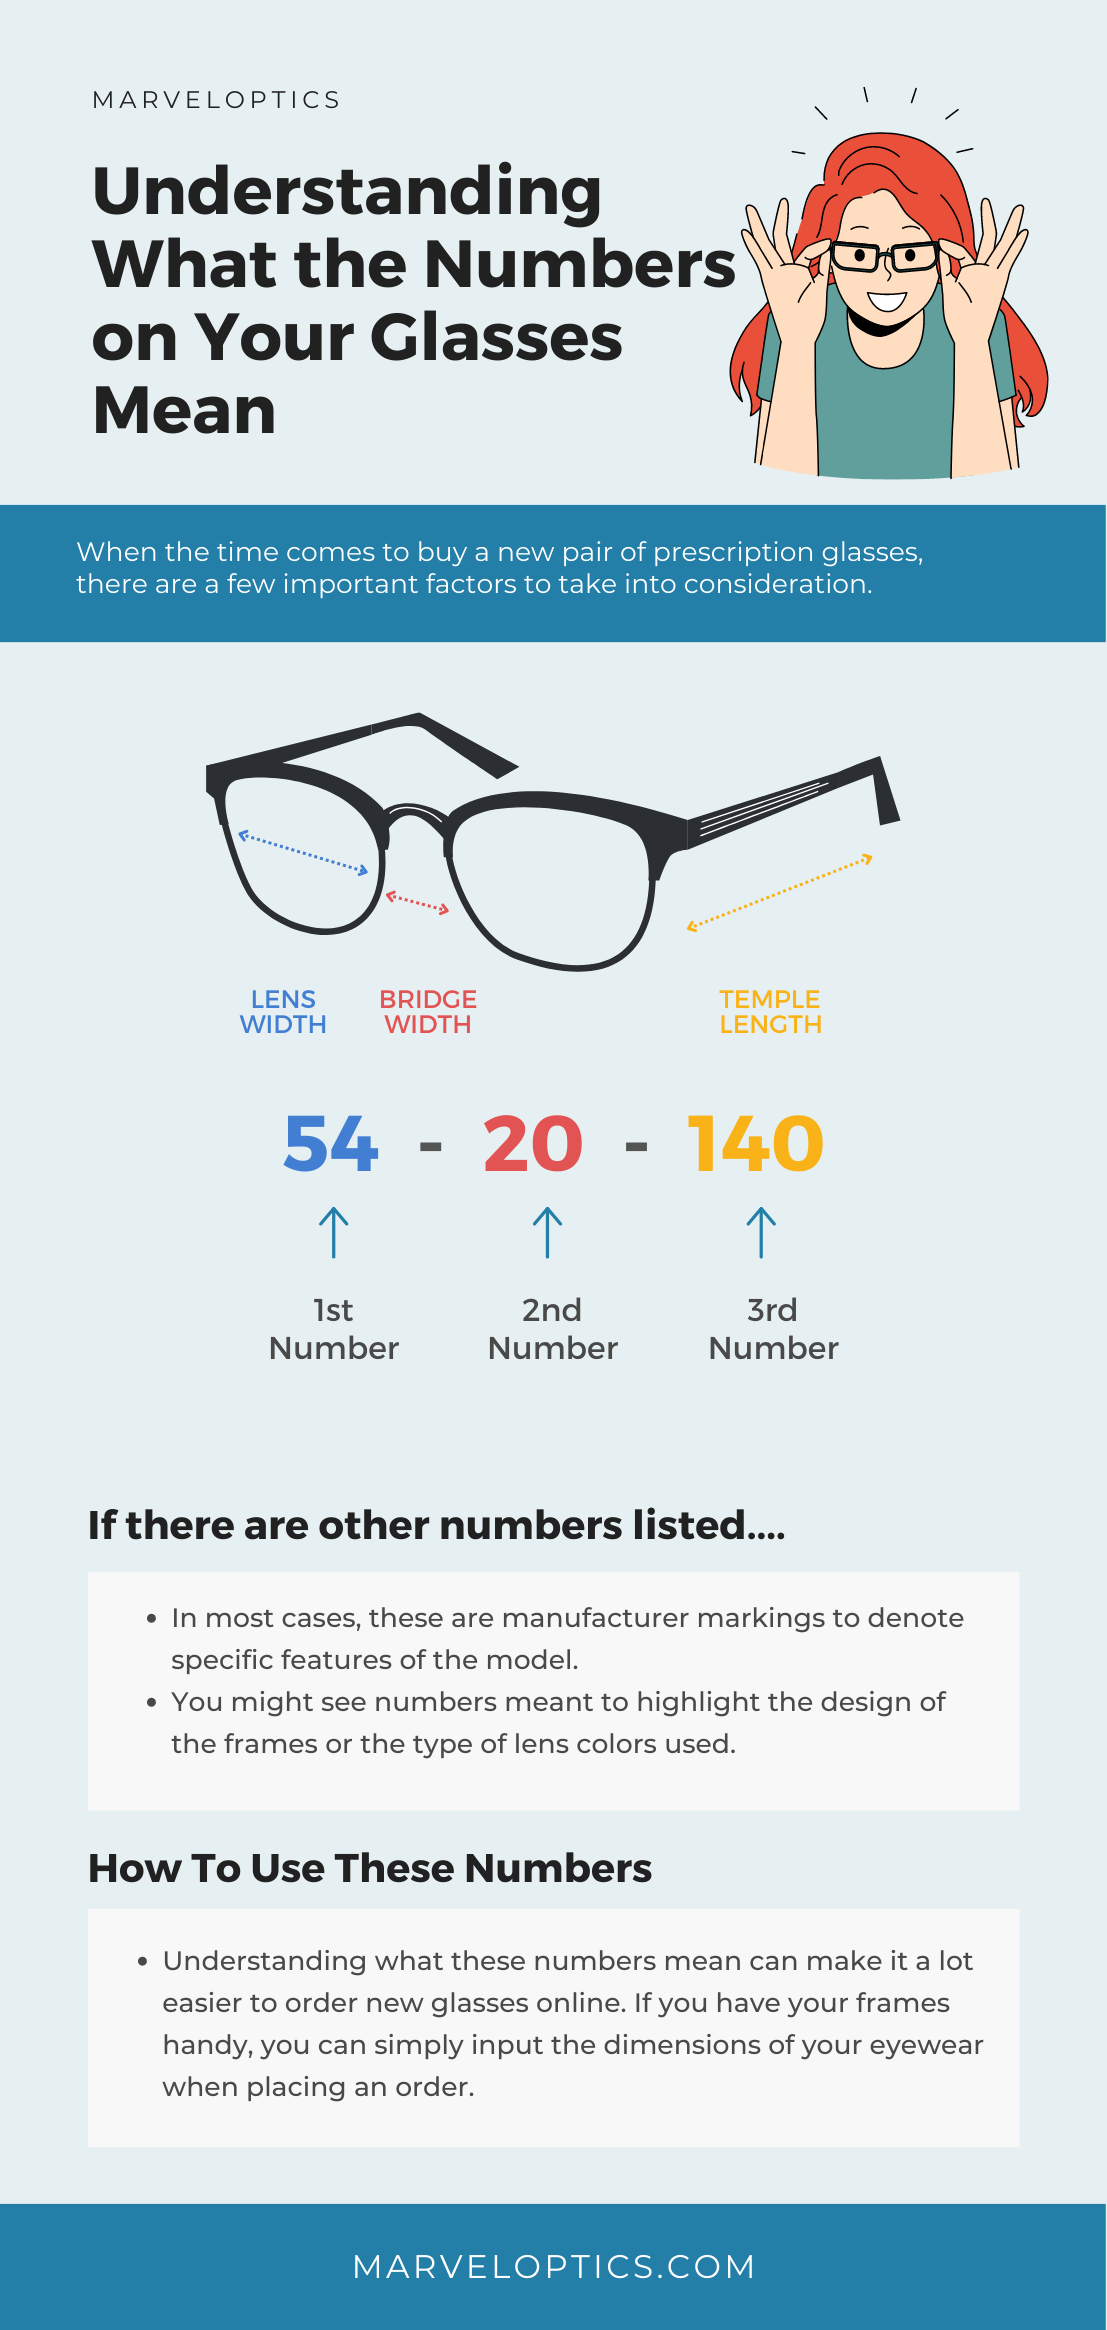 Understanding What the Numbers on Your Glasses Mean infographic